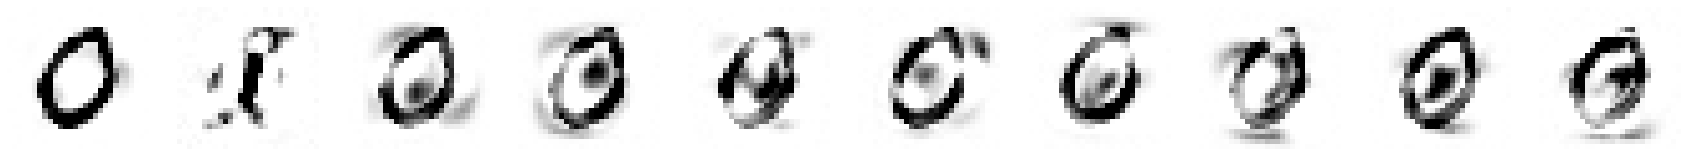 10 images, each resembling the digit 0 with some gray additions and removals